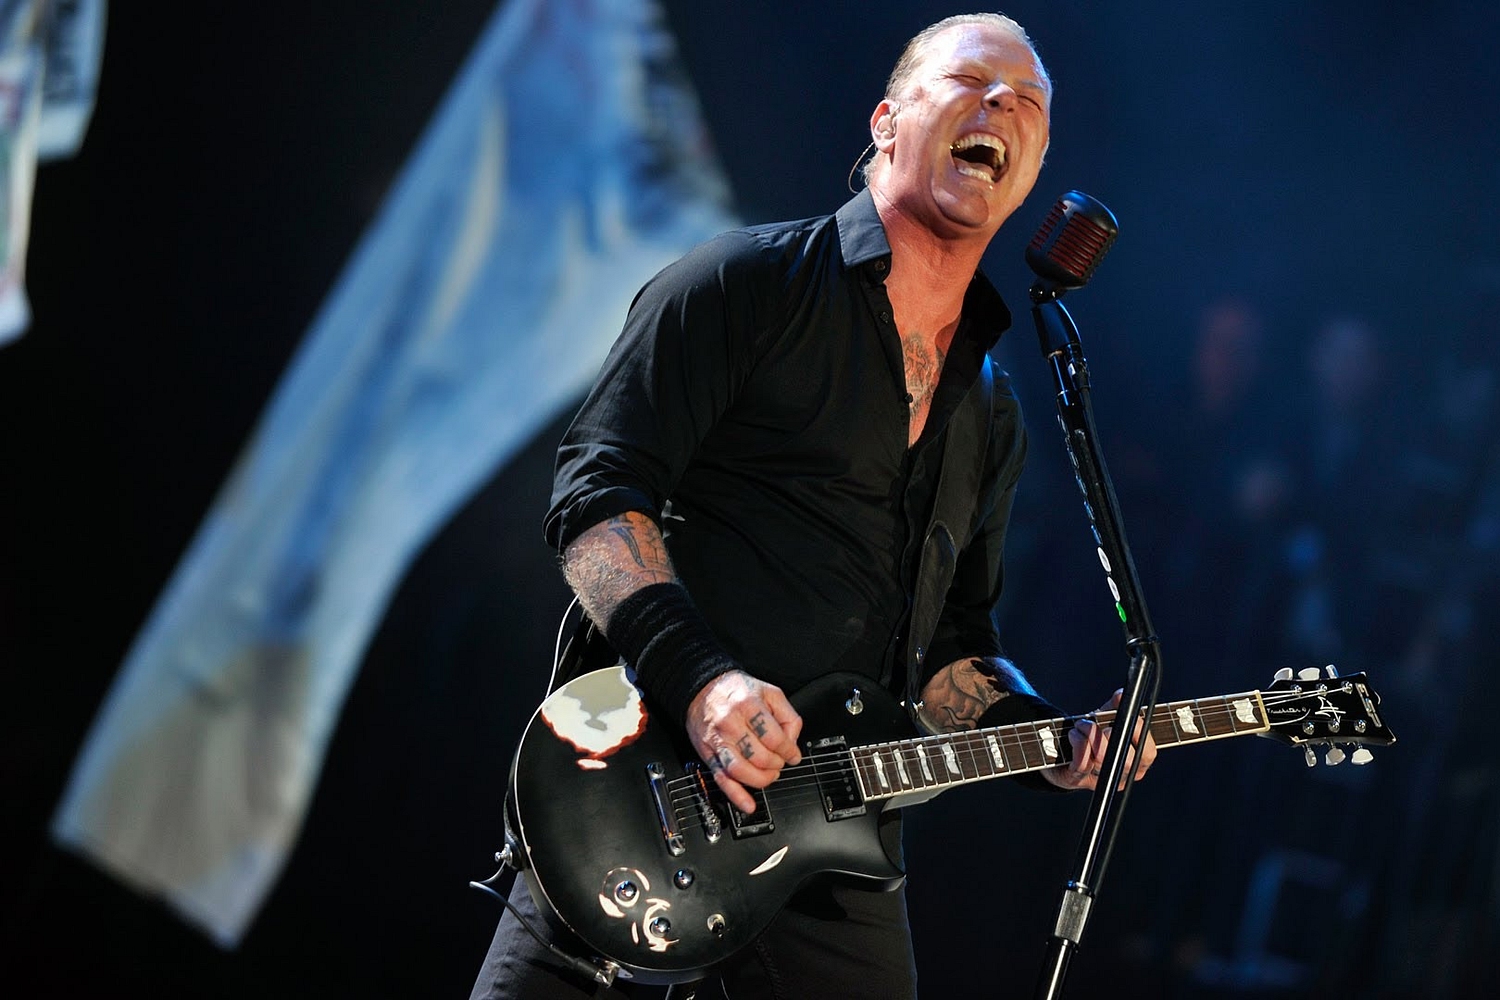 See Metallica face down Glastonbury 2014 with ‘One’